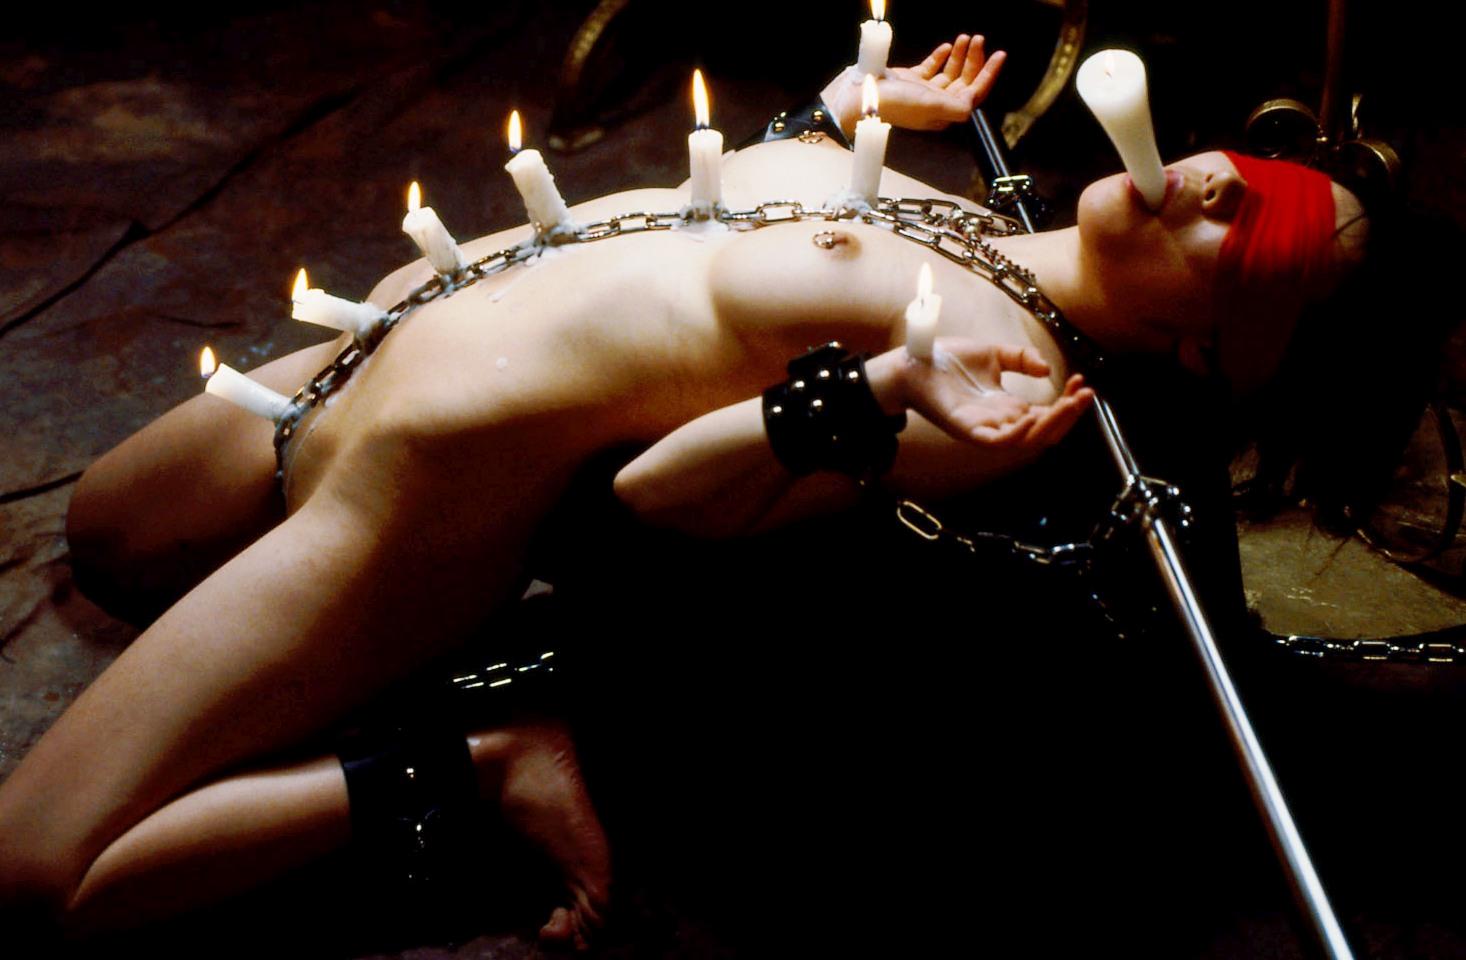 Chained BDSM slave in a hot candle and wax fetish session